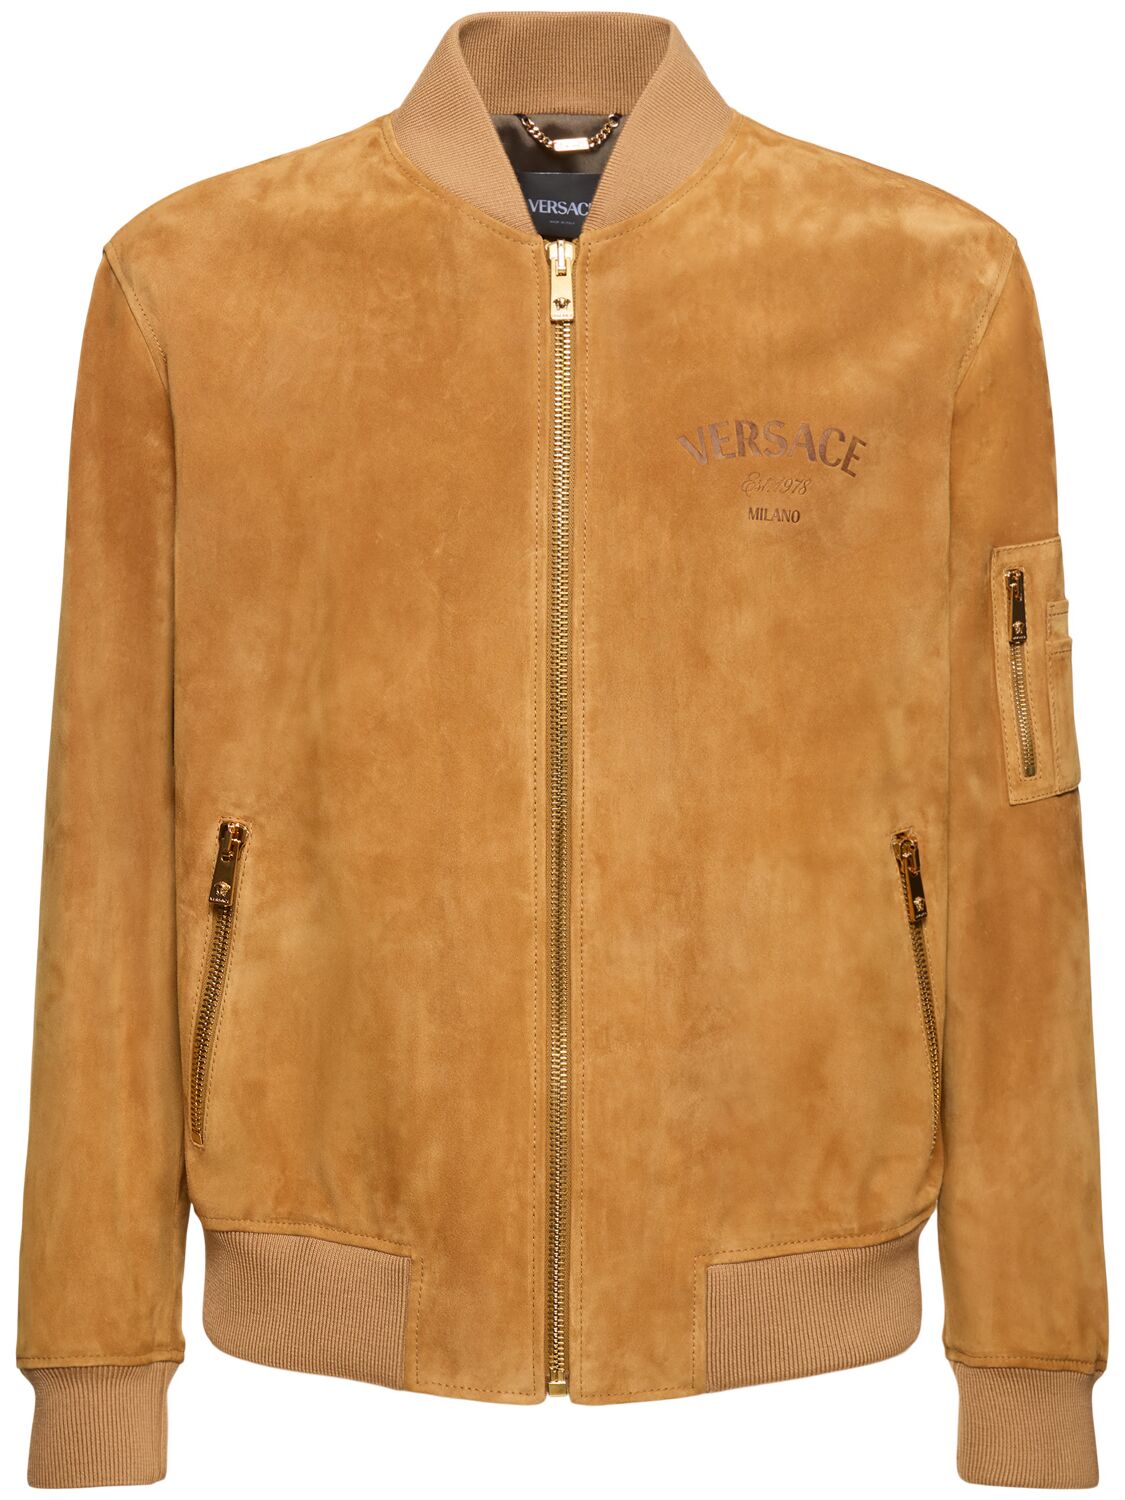 Versace Suede Leather Jacket In Tan